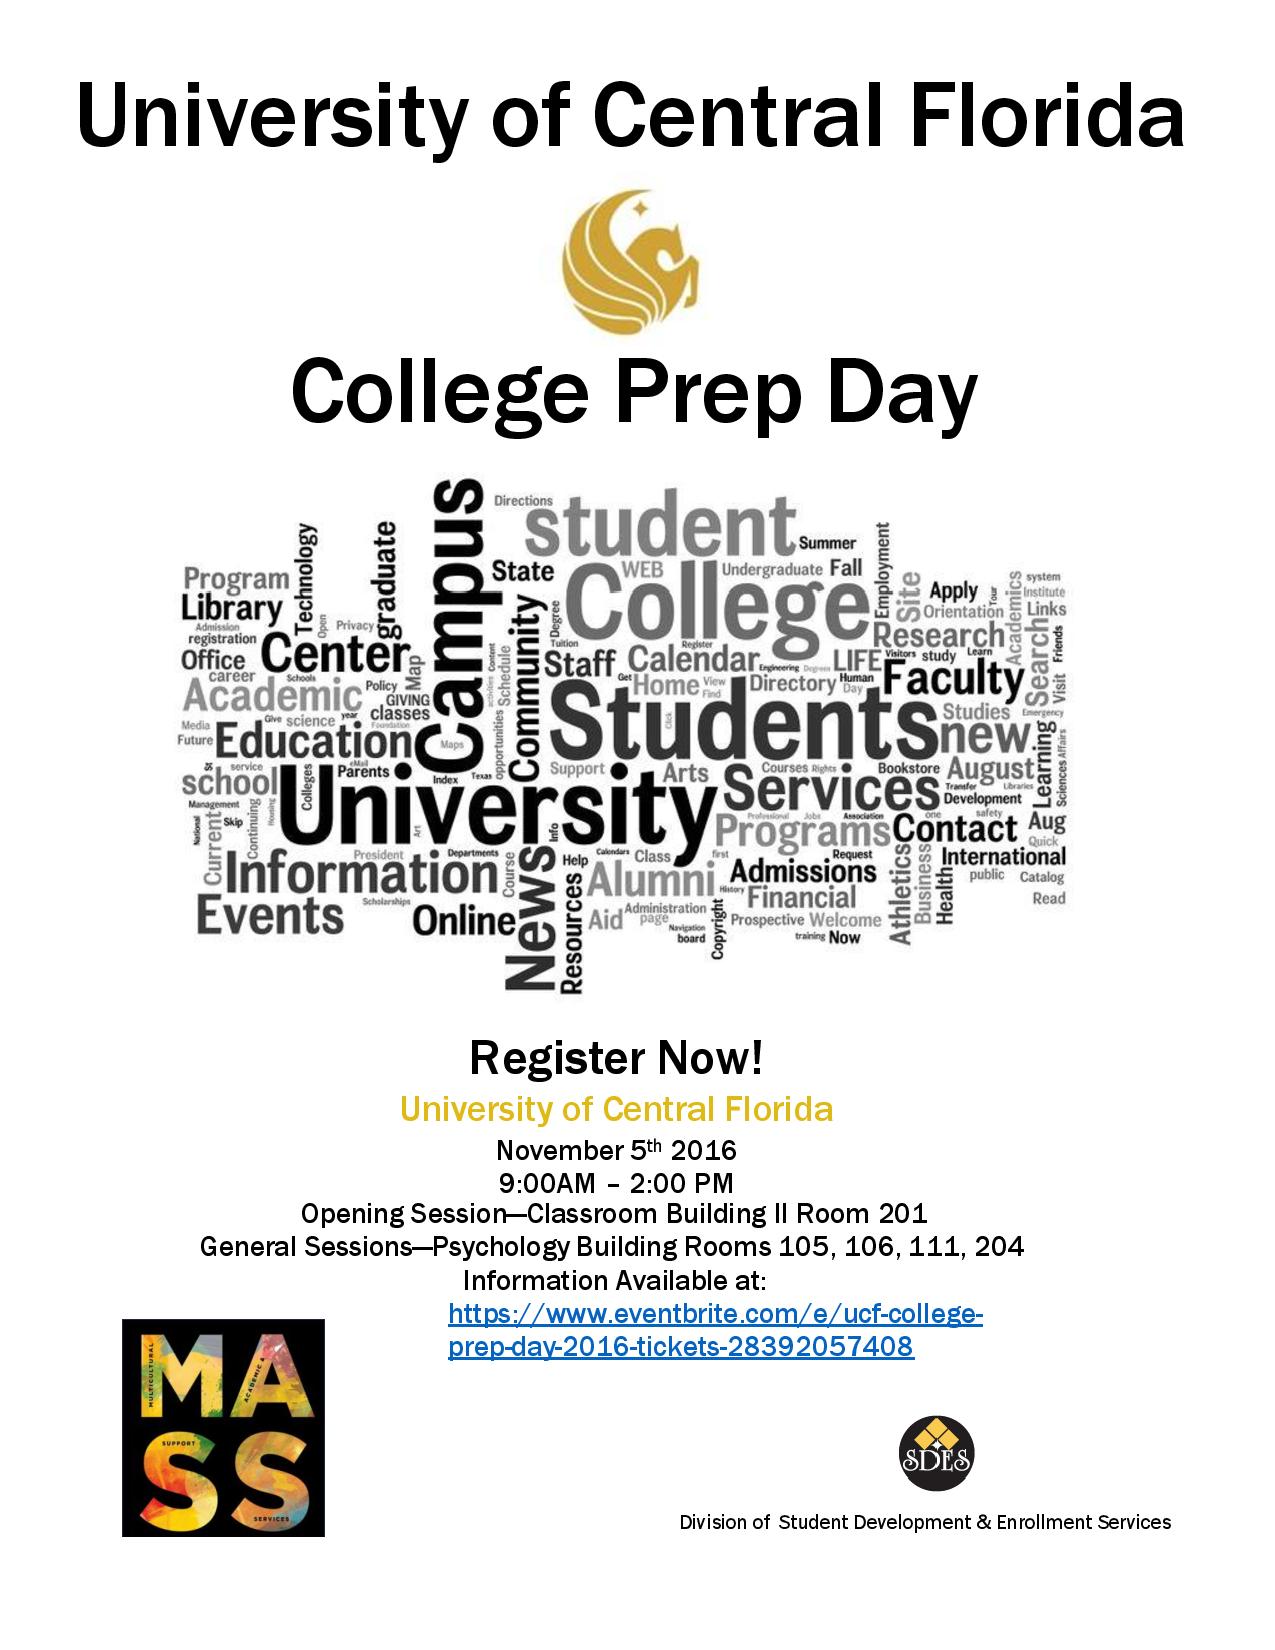 College Prep Day @ UCF